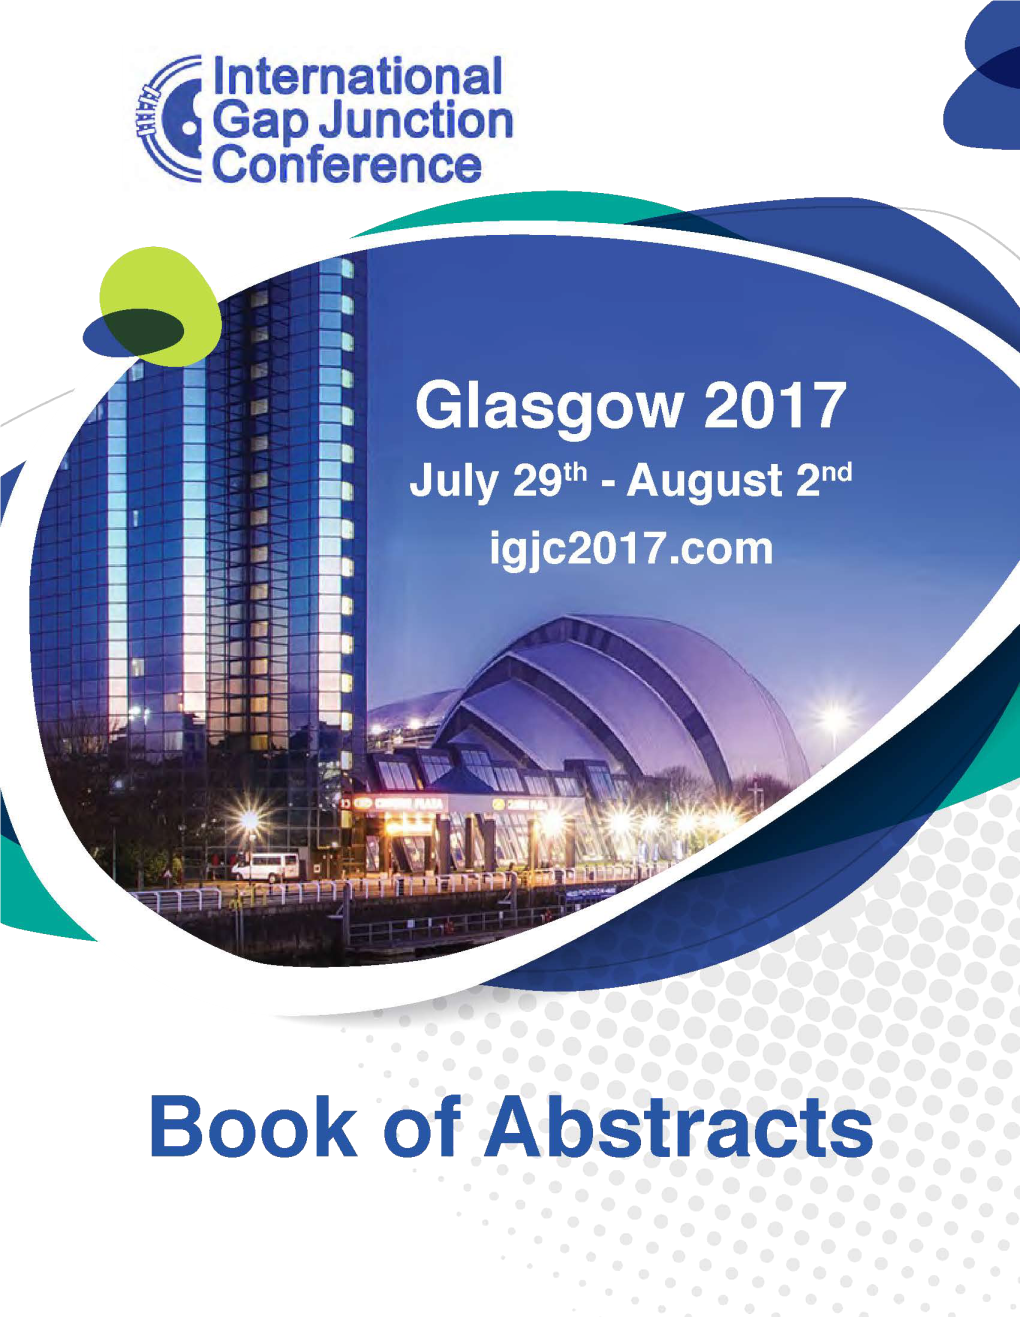 Link to Abstract Book